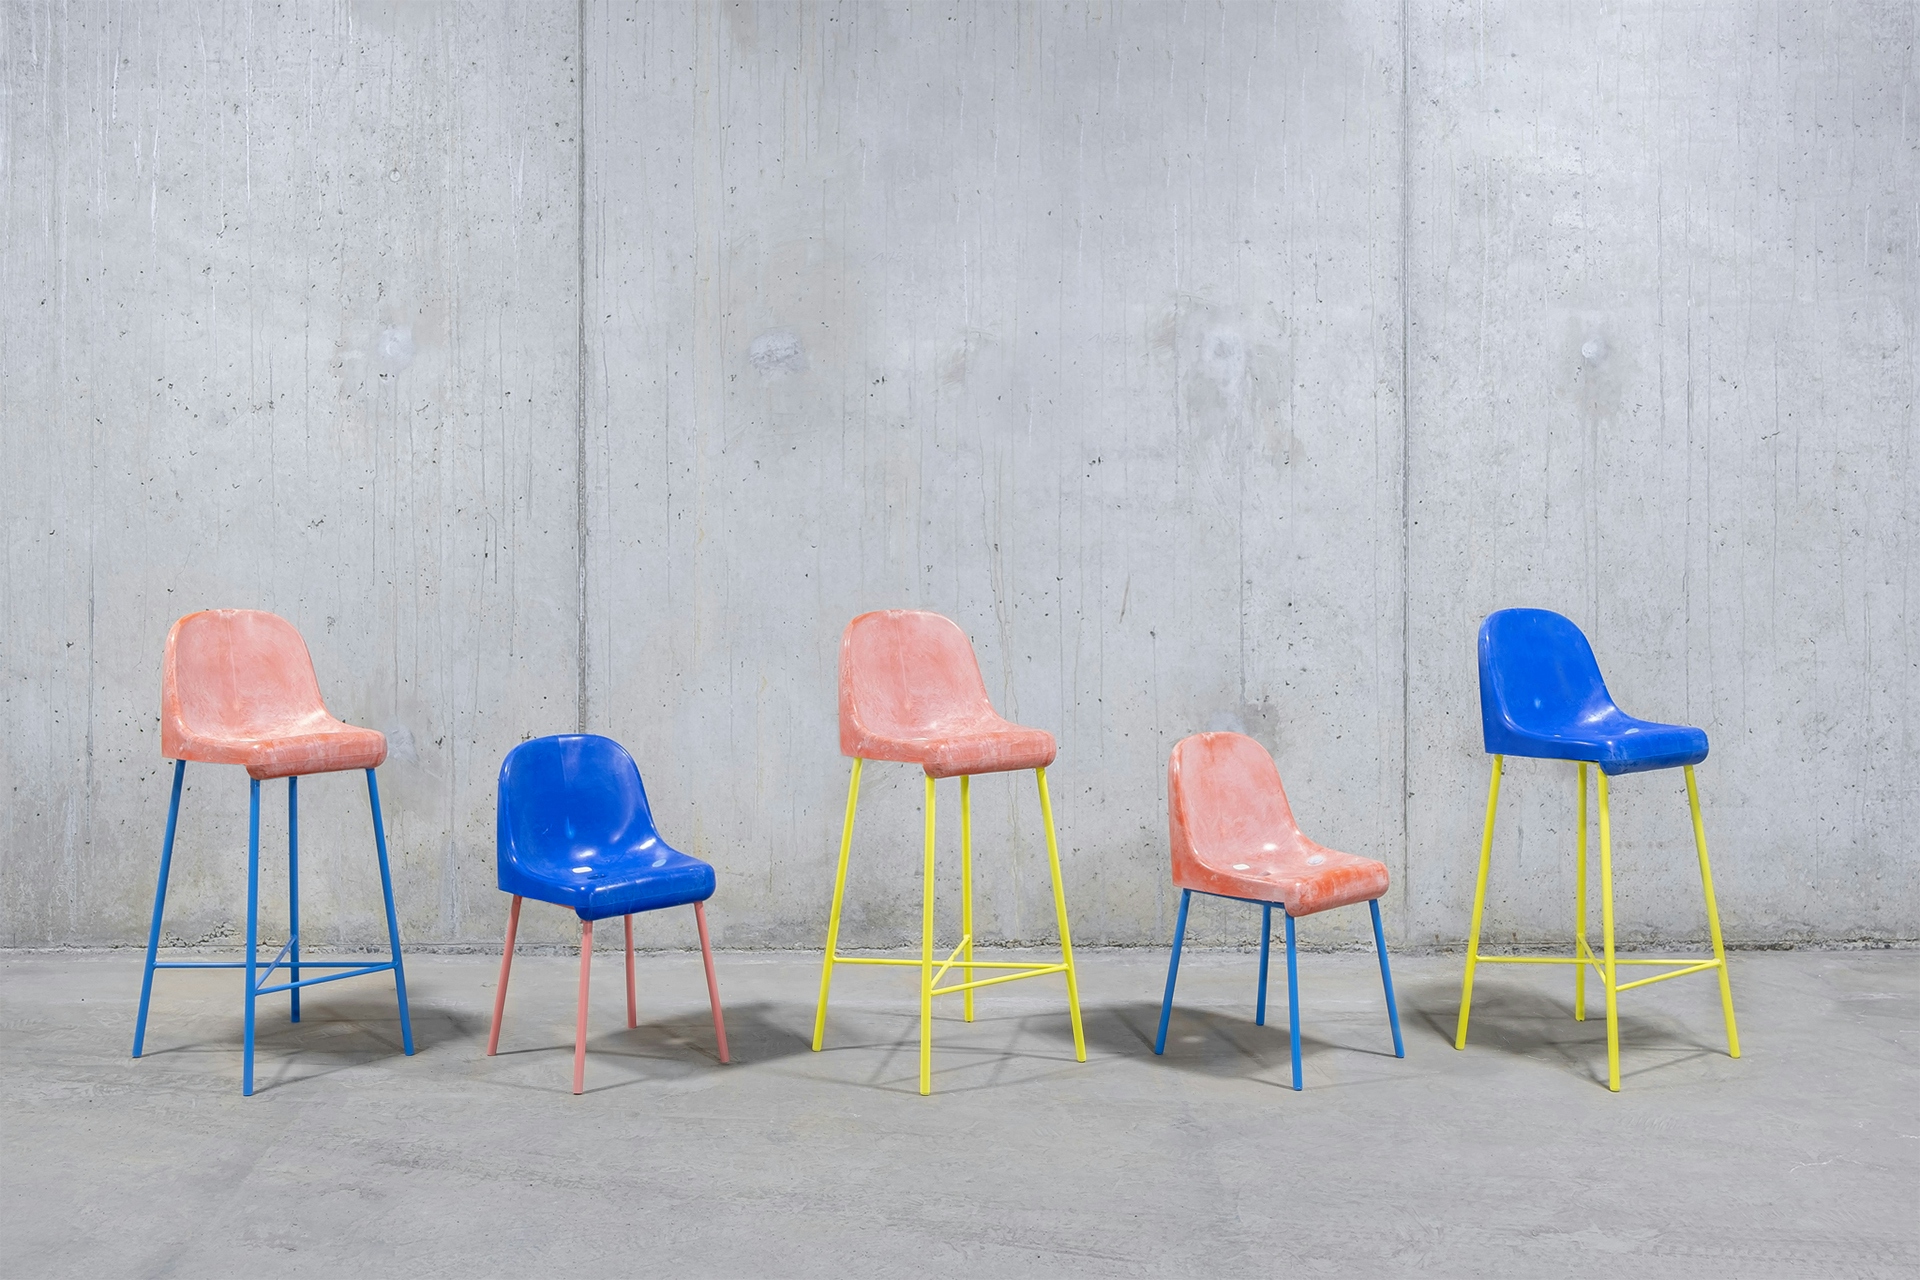 The Fan Chair - A chair collection that gives a new life to discarded plastic stadium seats